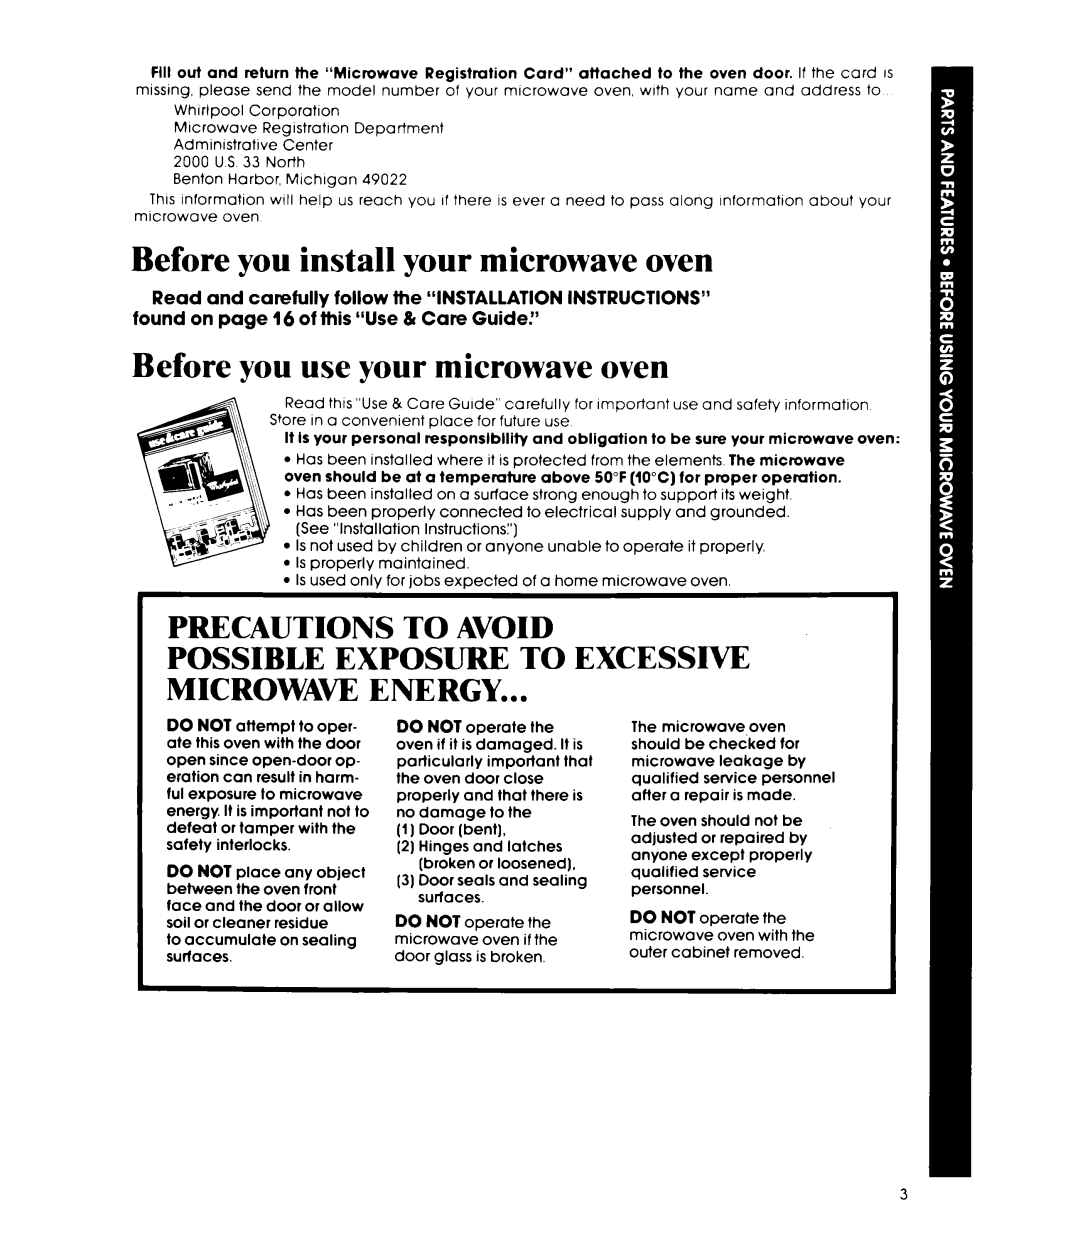 Whirlpool MW85OOXP manual Before you install your microwave oven, Before you use your microwave oven, Precautions To Avoid 